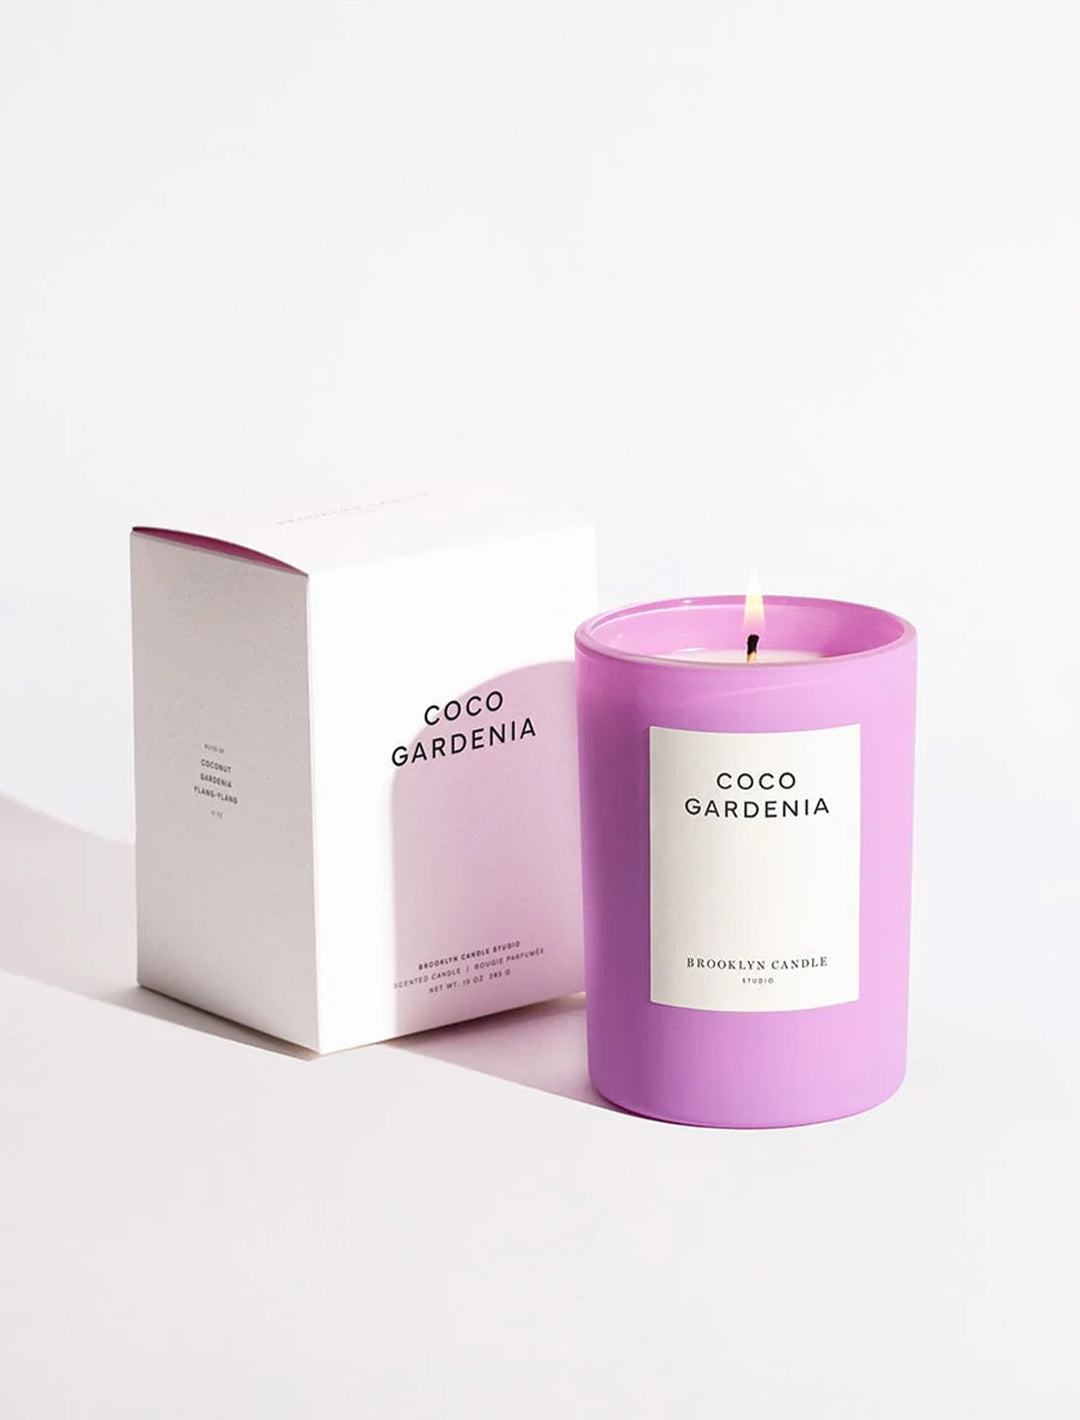 Packaging photo of Brooklyn Candle Studio's coco gardenia candle.